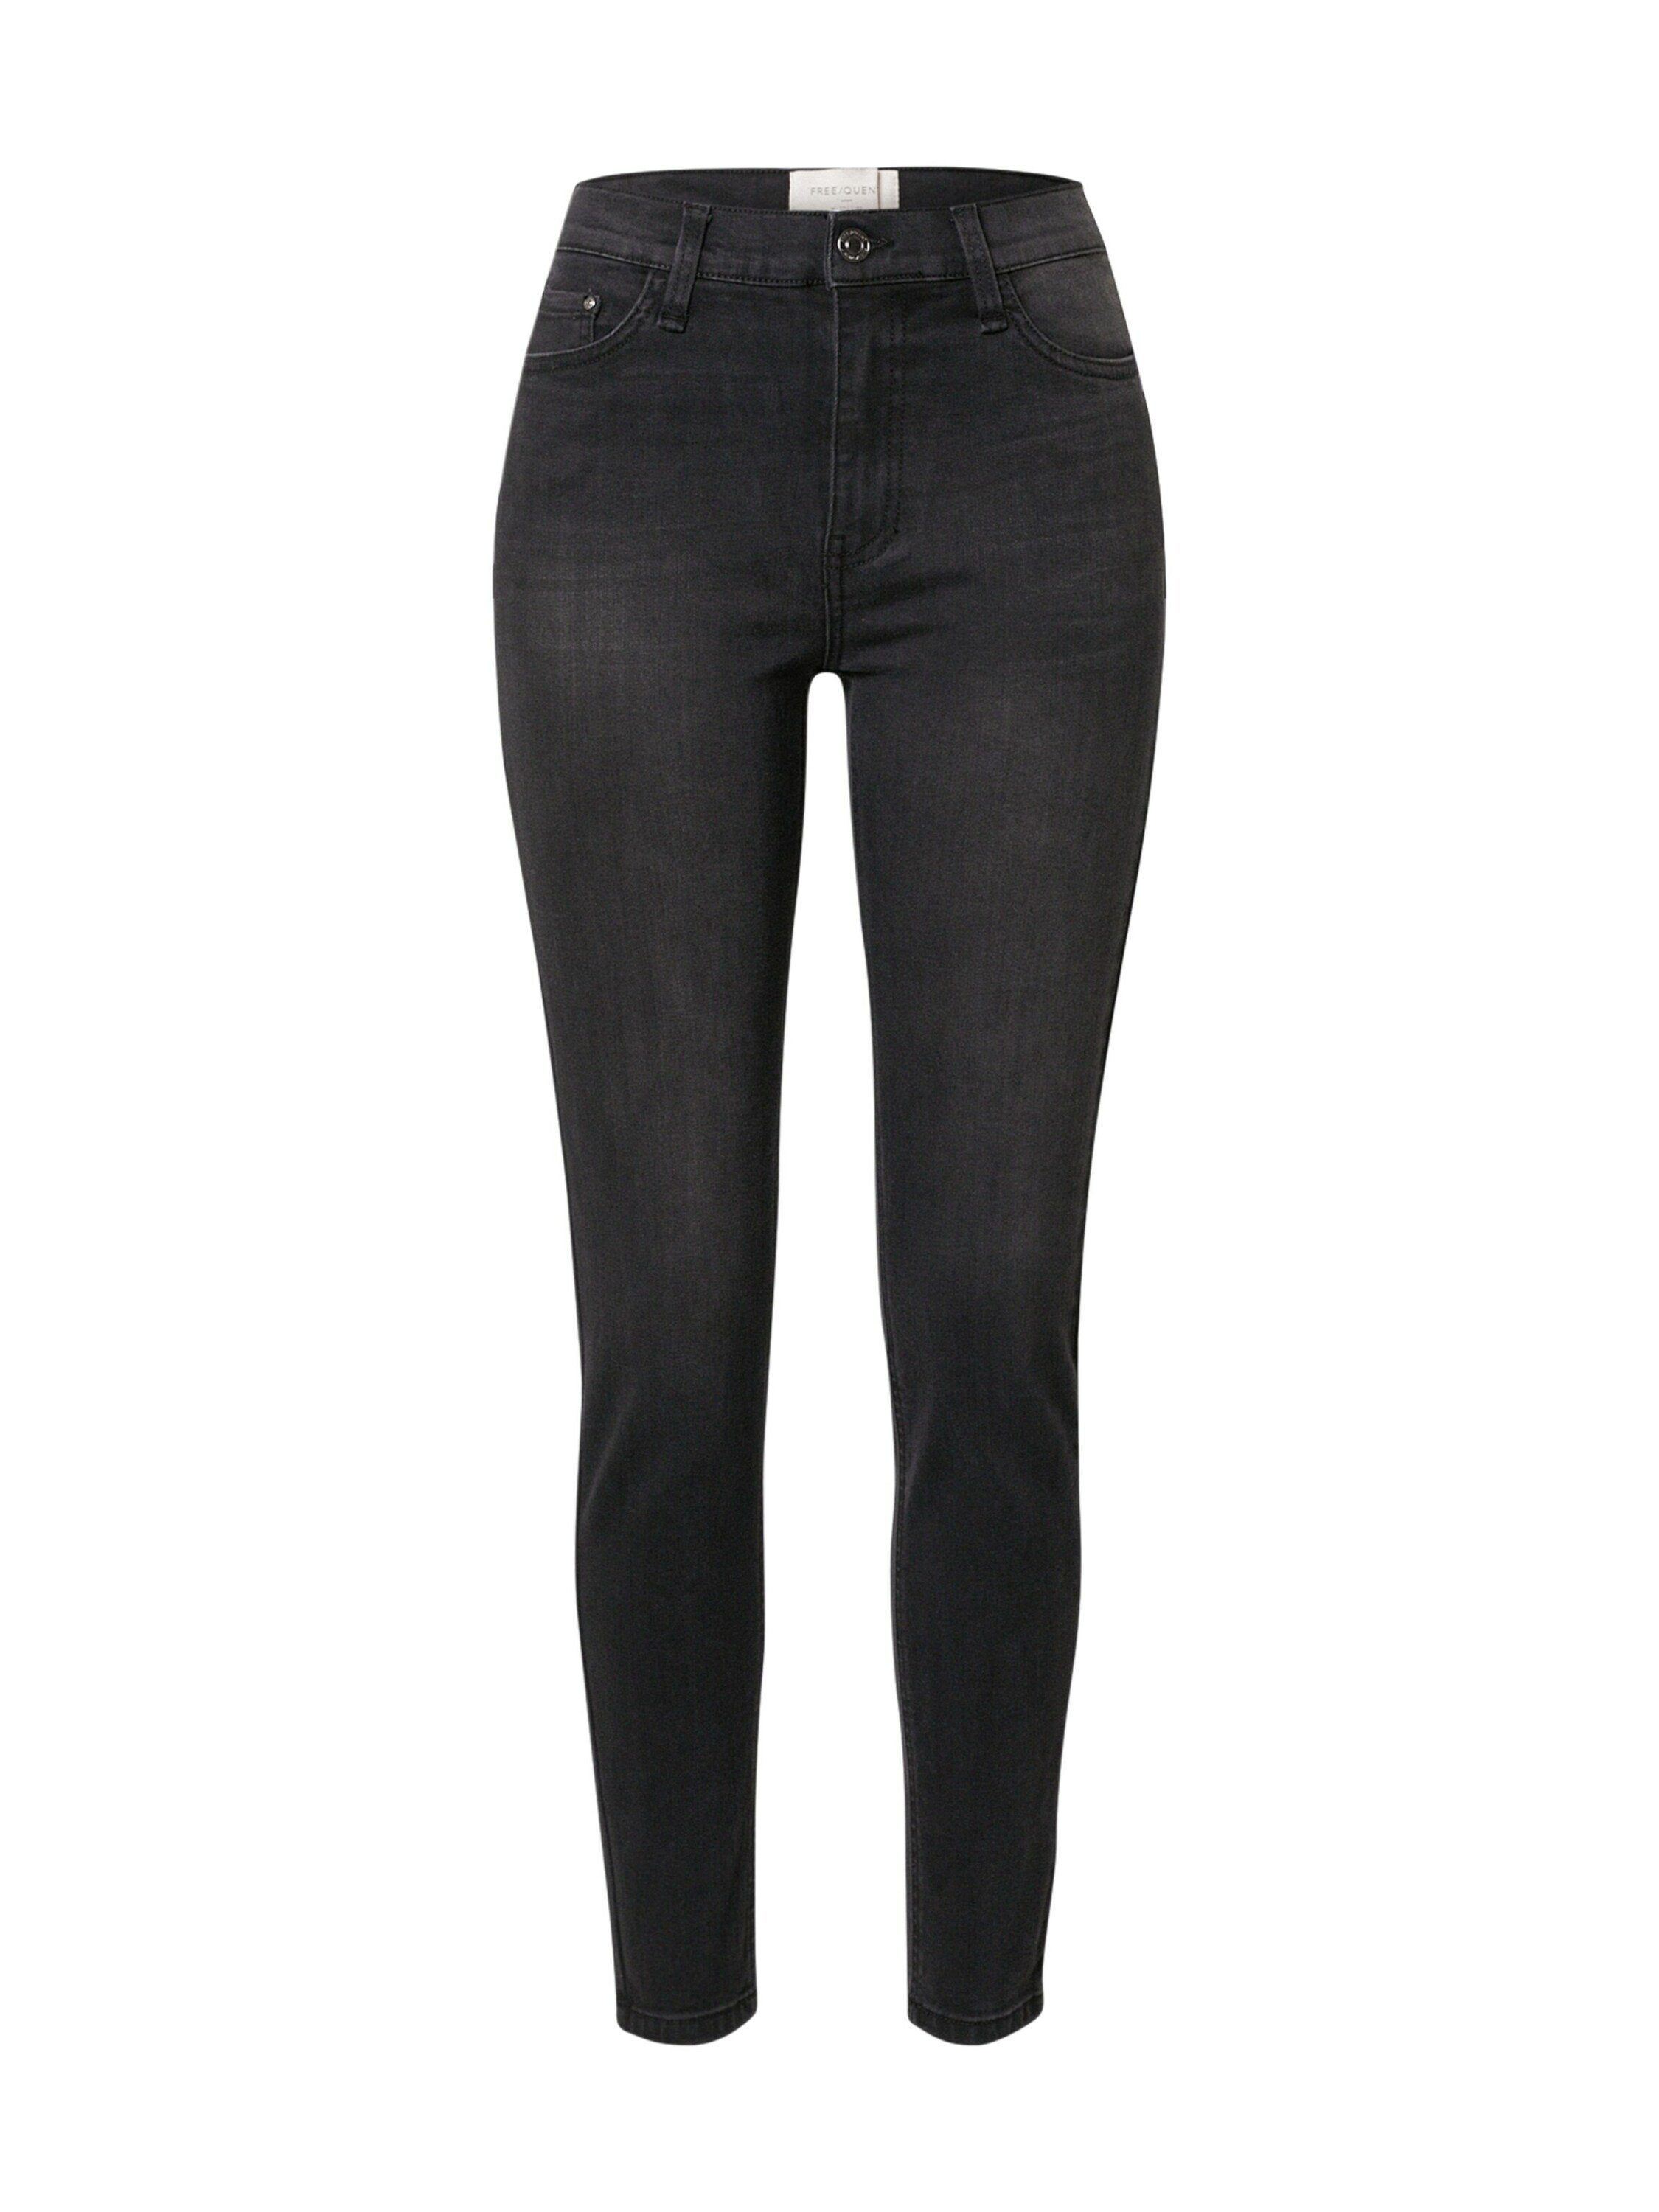 Damen Jeans FREEQUENT Skinny-fit-Jeans